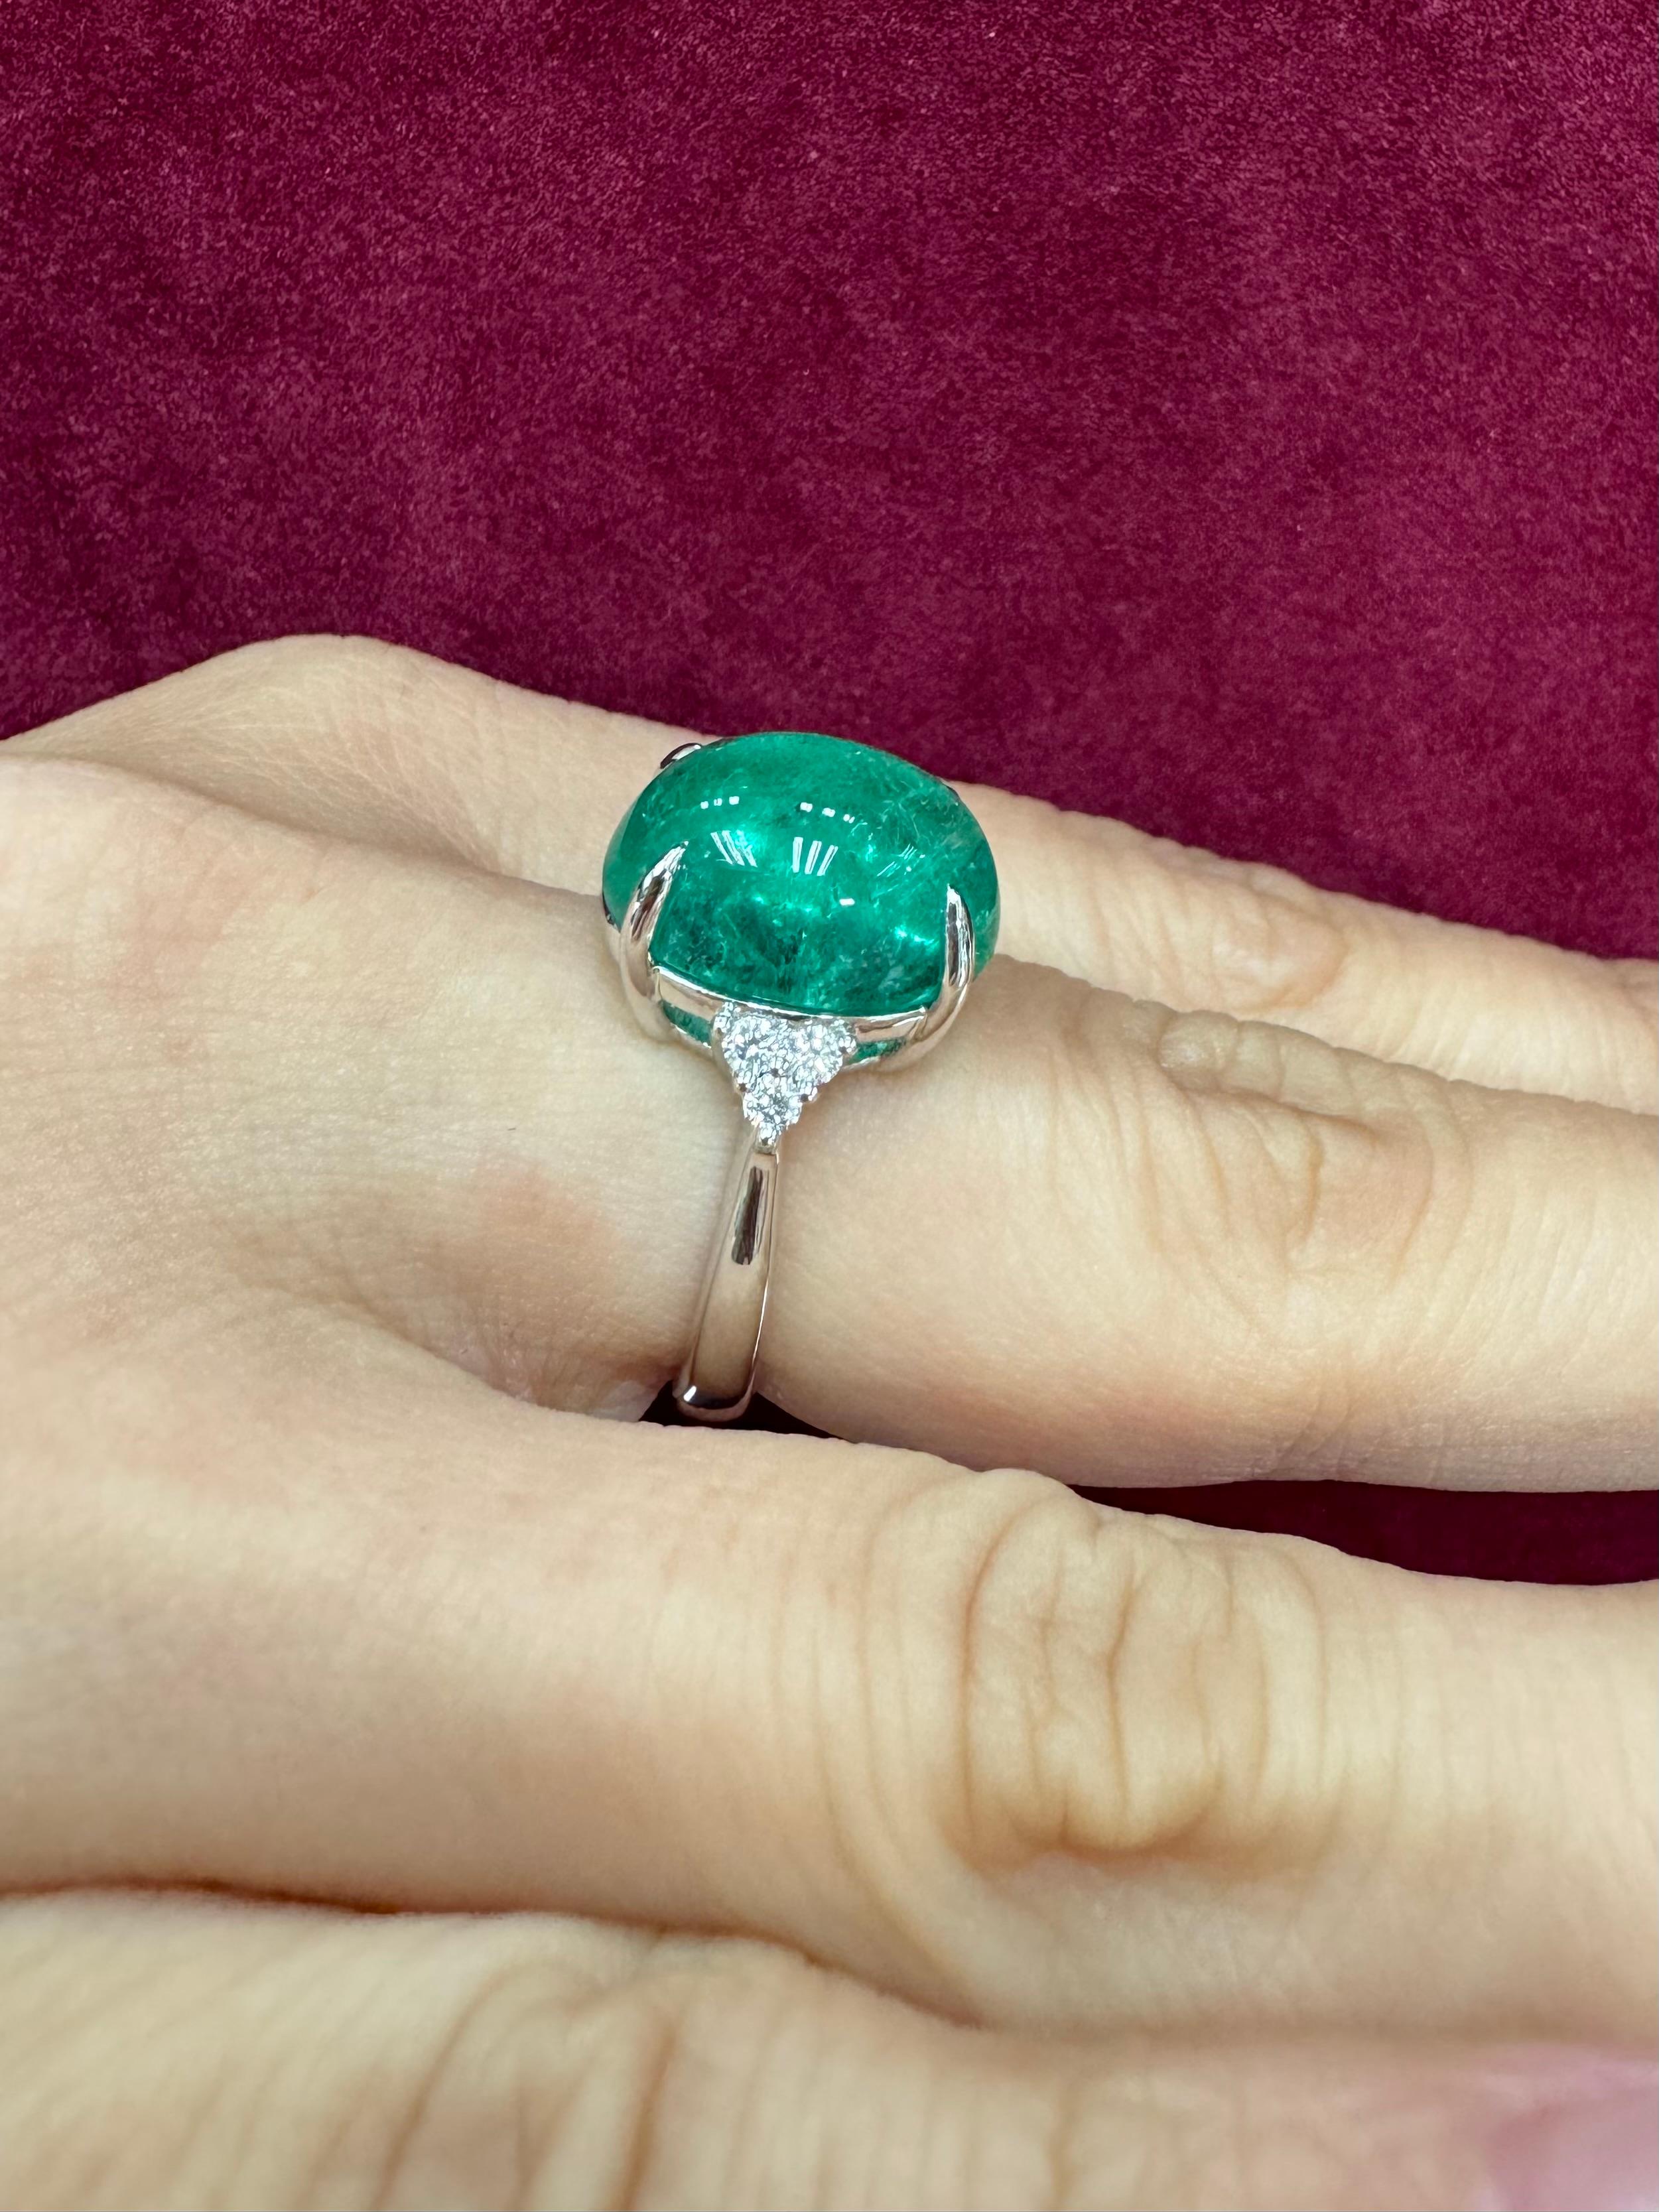 Cabochon GRS Certified 10.06 Cts Columbian Minor Emerald Ring. Large Statement Ring For Sale